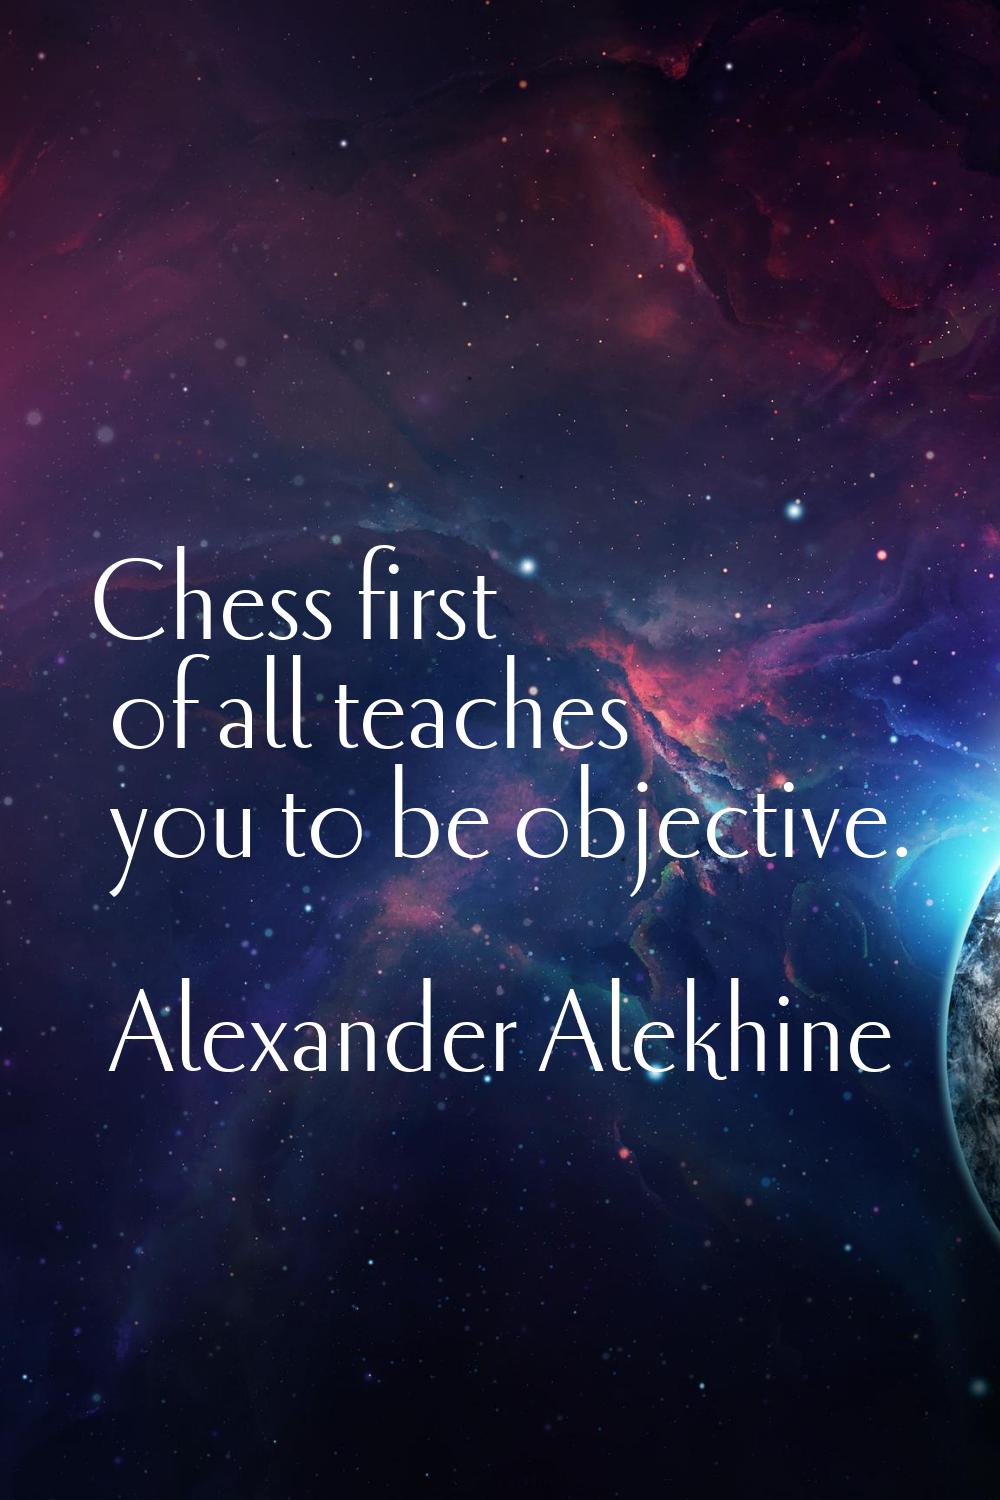 Chess first of all teaches you to be objective.